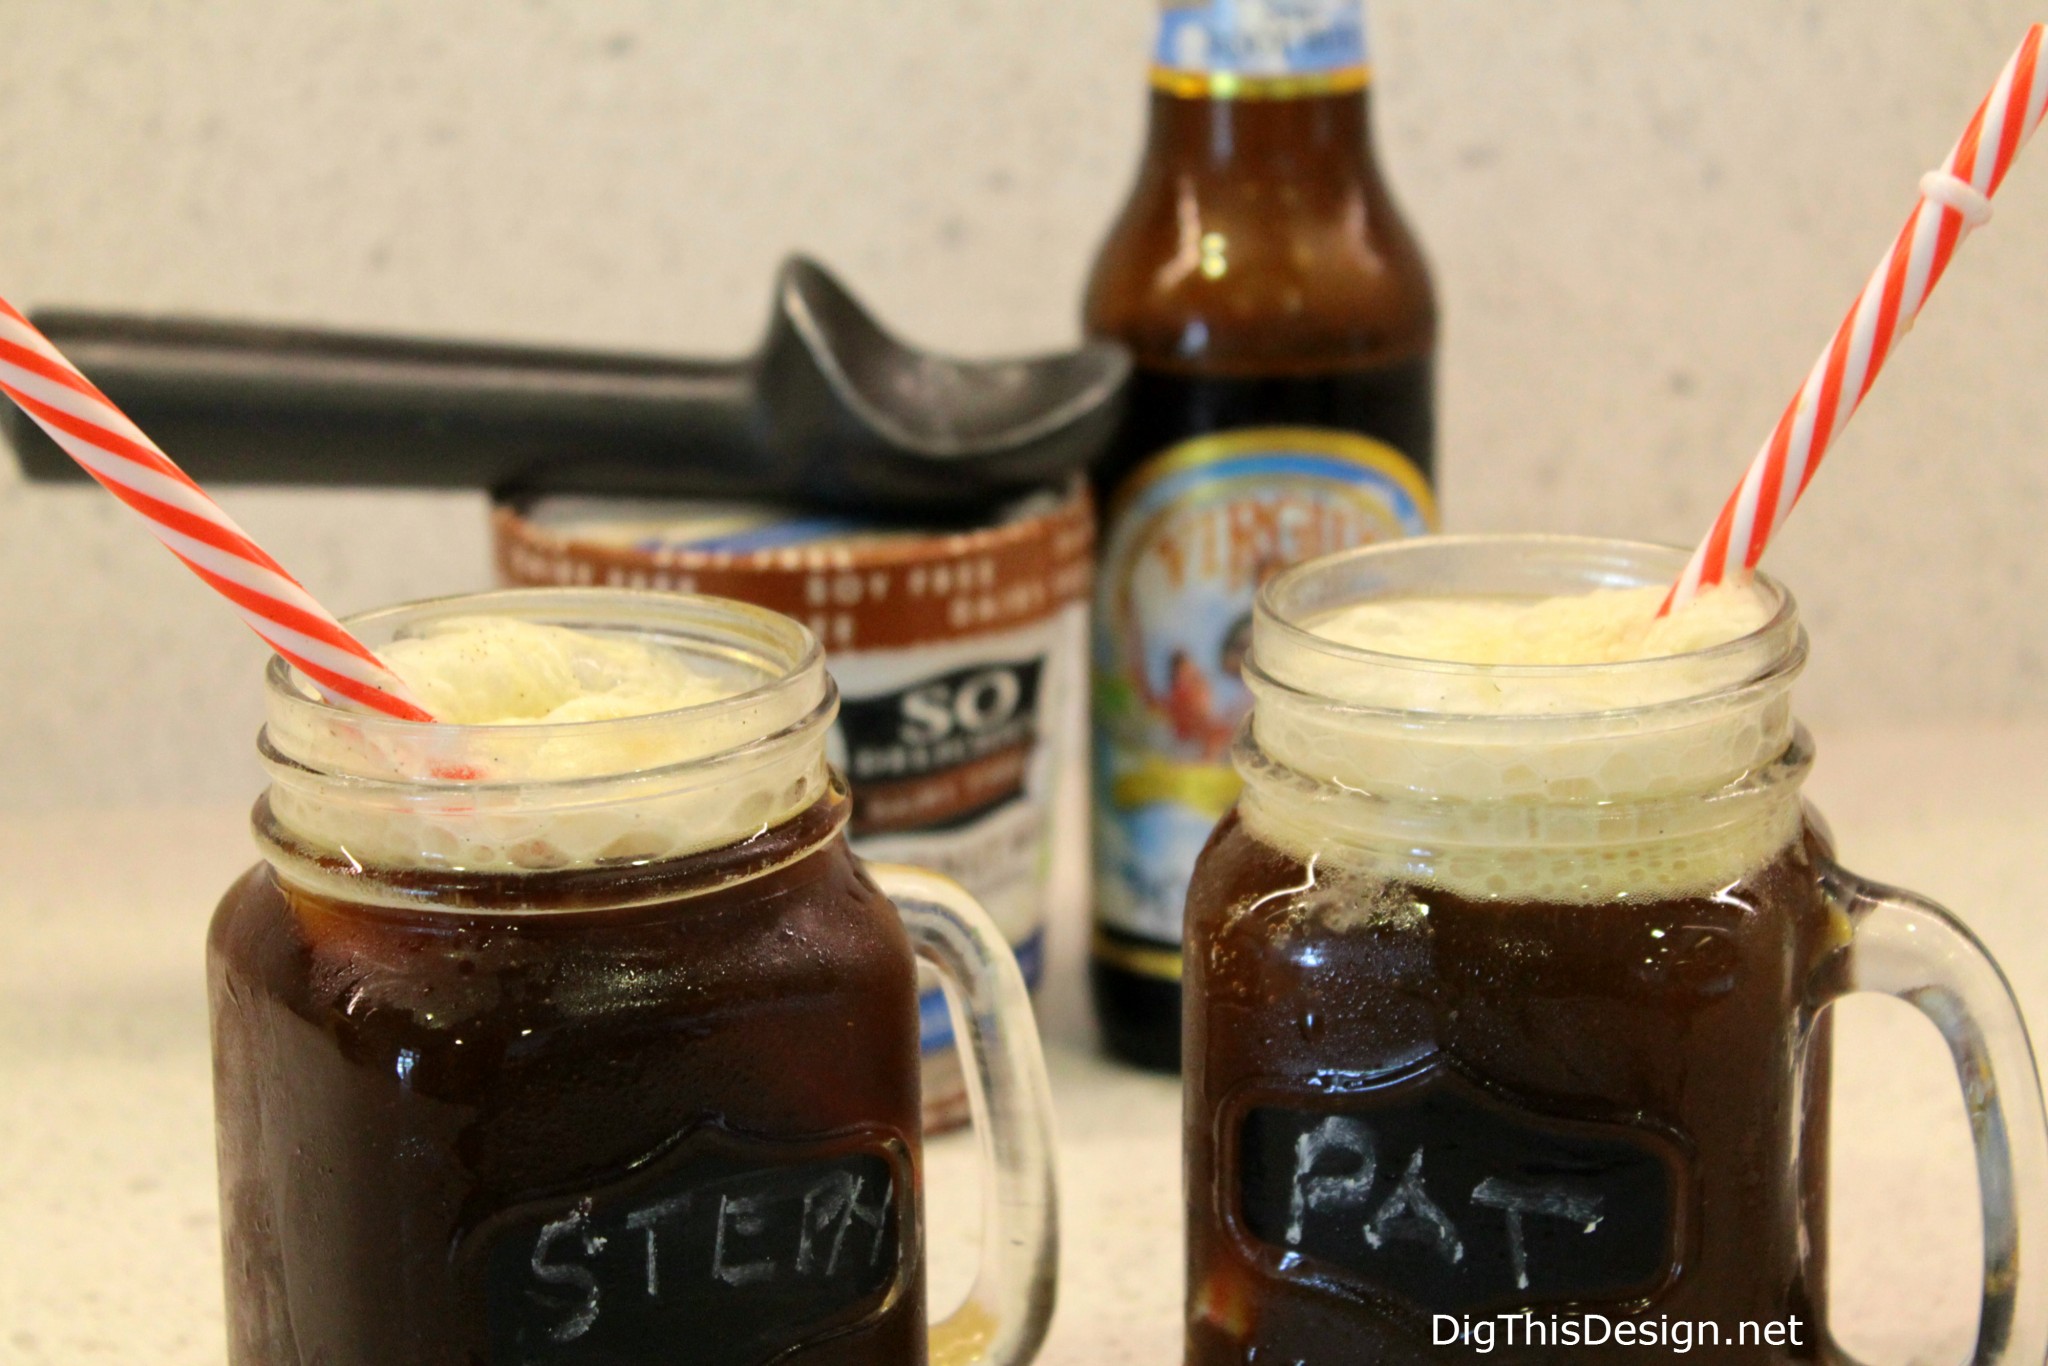 Guilt-free "CLEAN" root beer float from Clean Drink Happy Hour